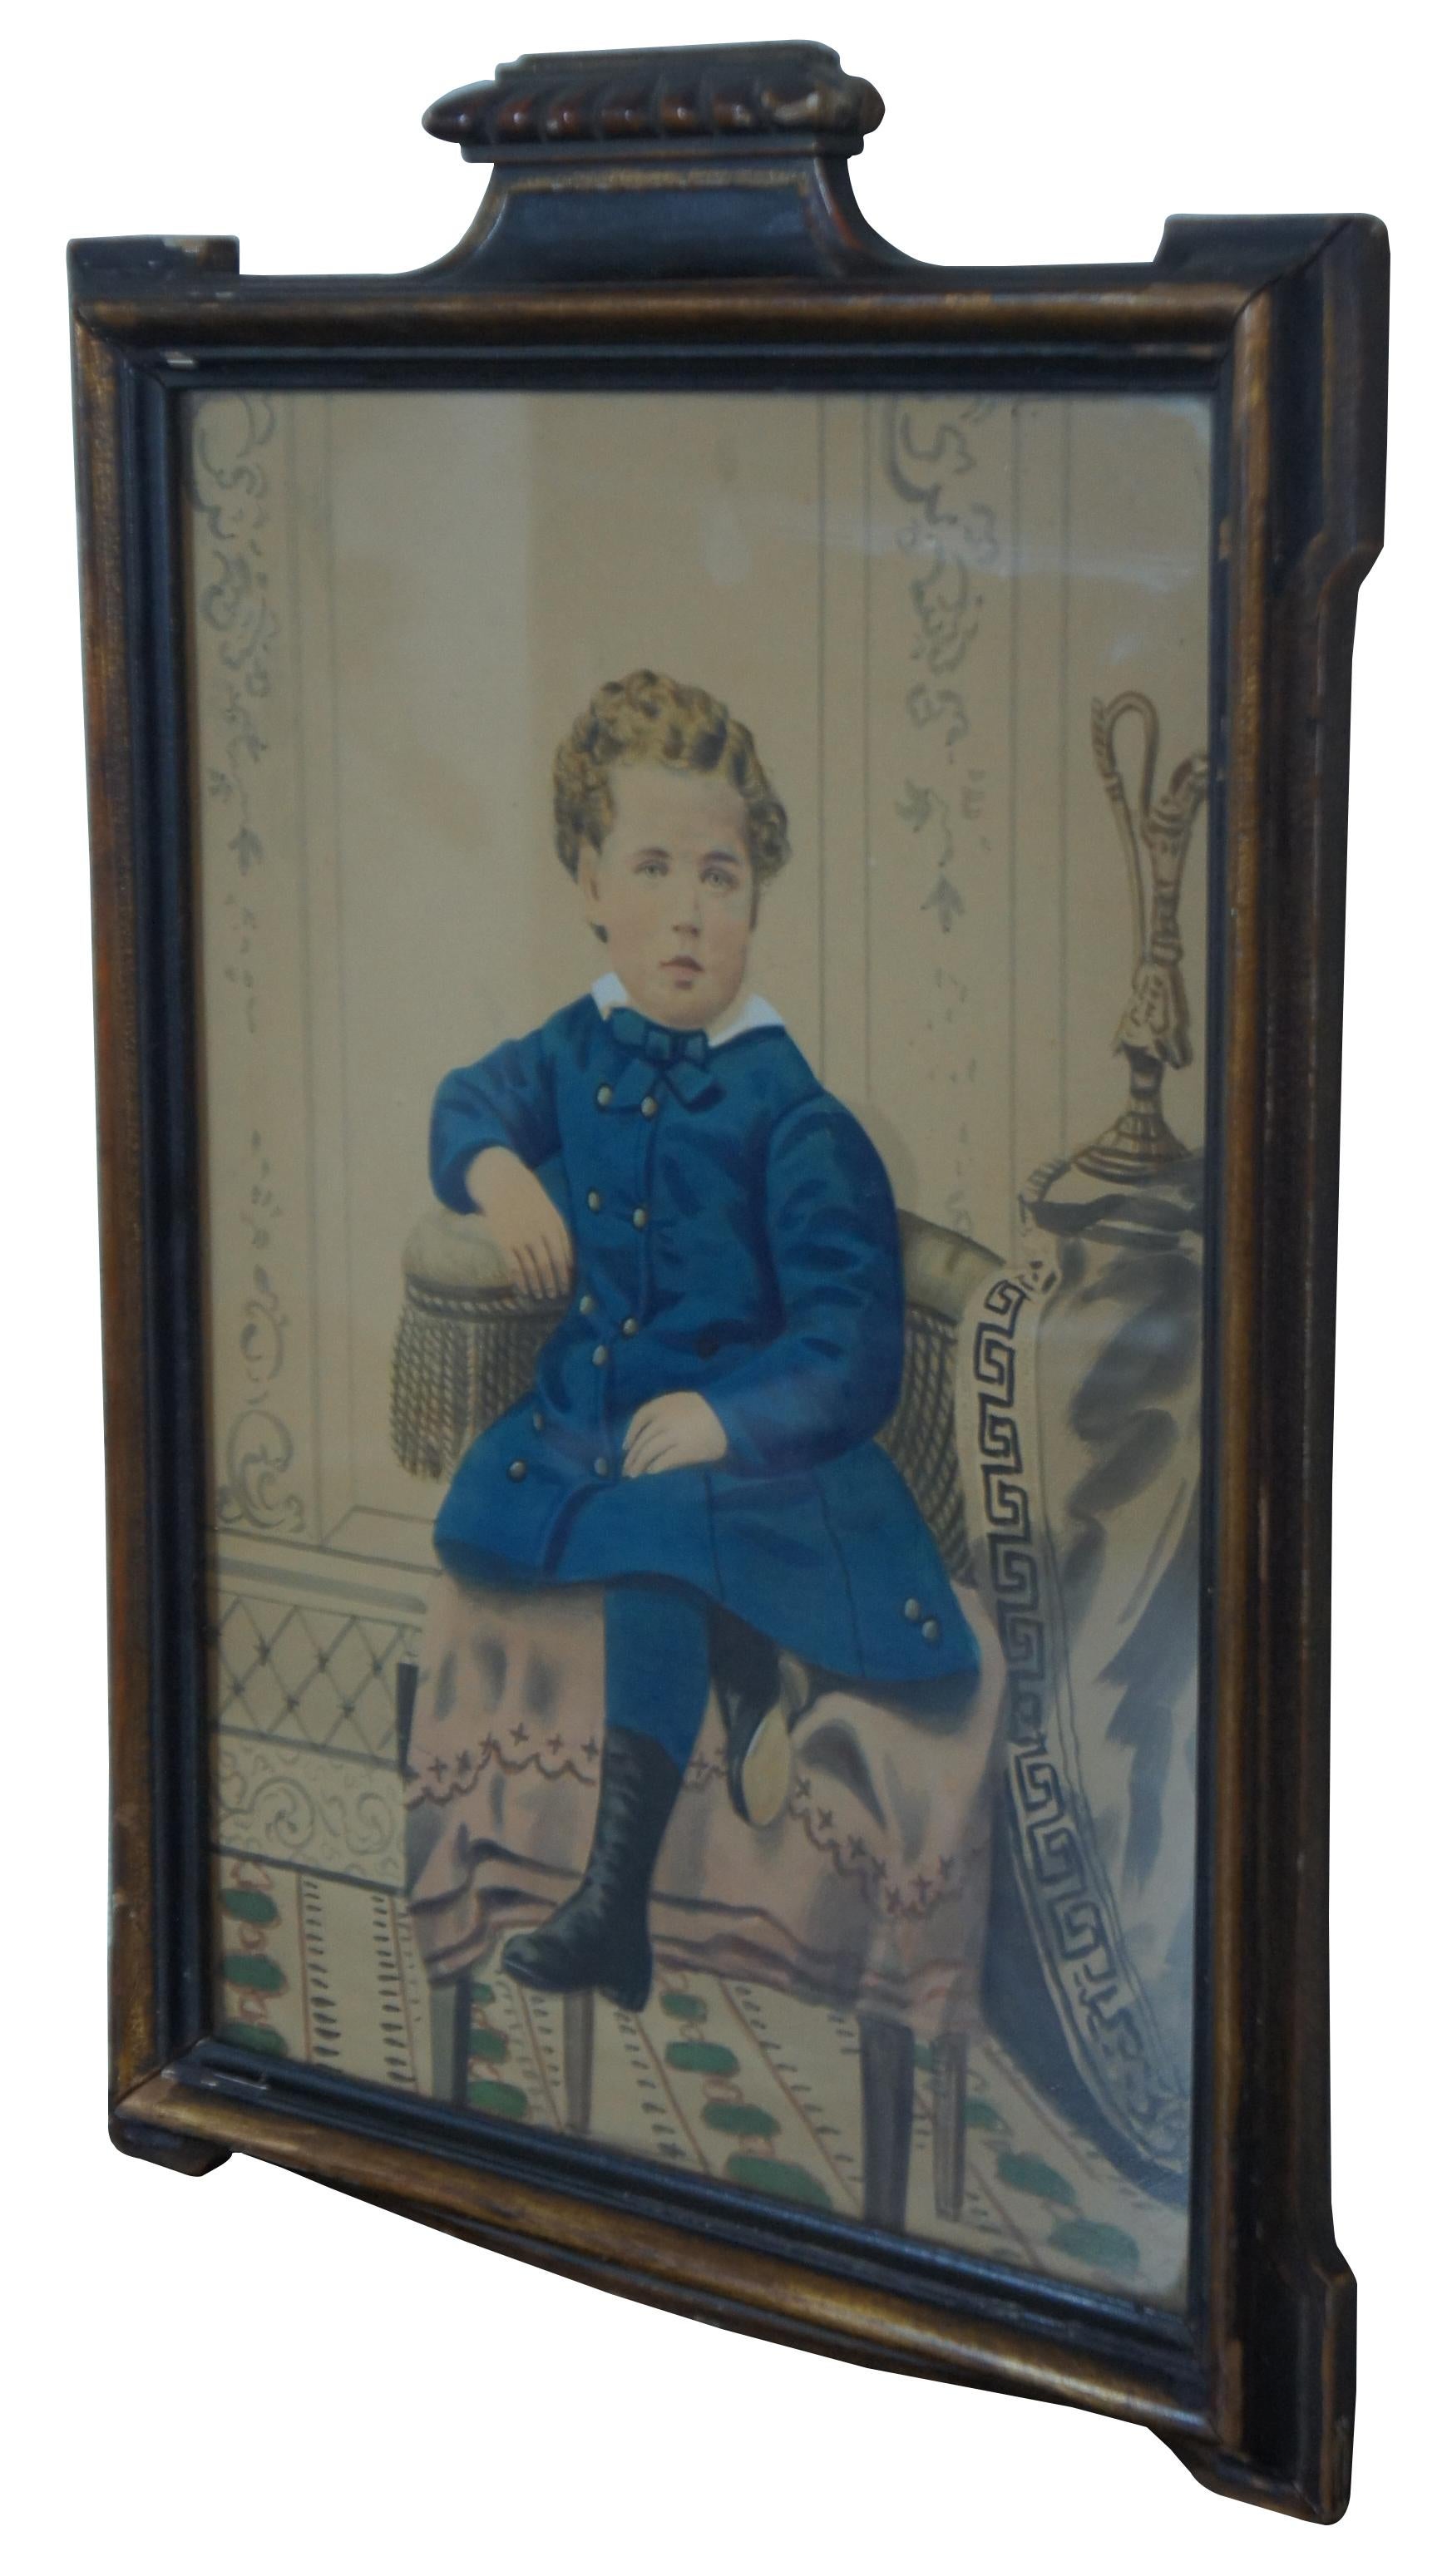 Antique Victorian watercolor portrait painting of a young boy in a blue outfit, seated on a pink cloth covered chair.

Measures: 11.75” x 0.5” x 16” / Sans Frame – 9.5” x 12.5” (.Width x Depth x Height)